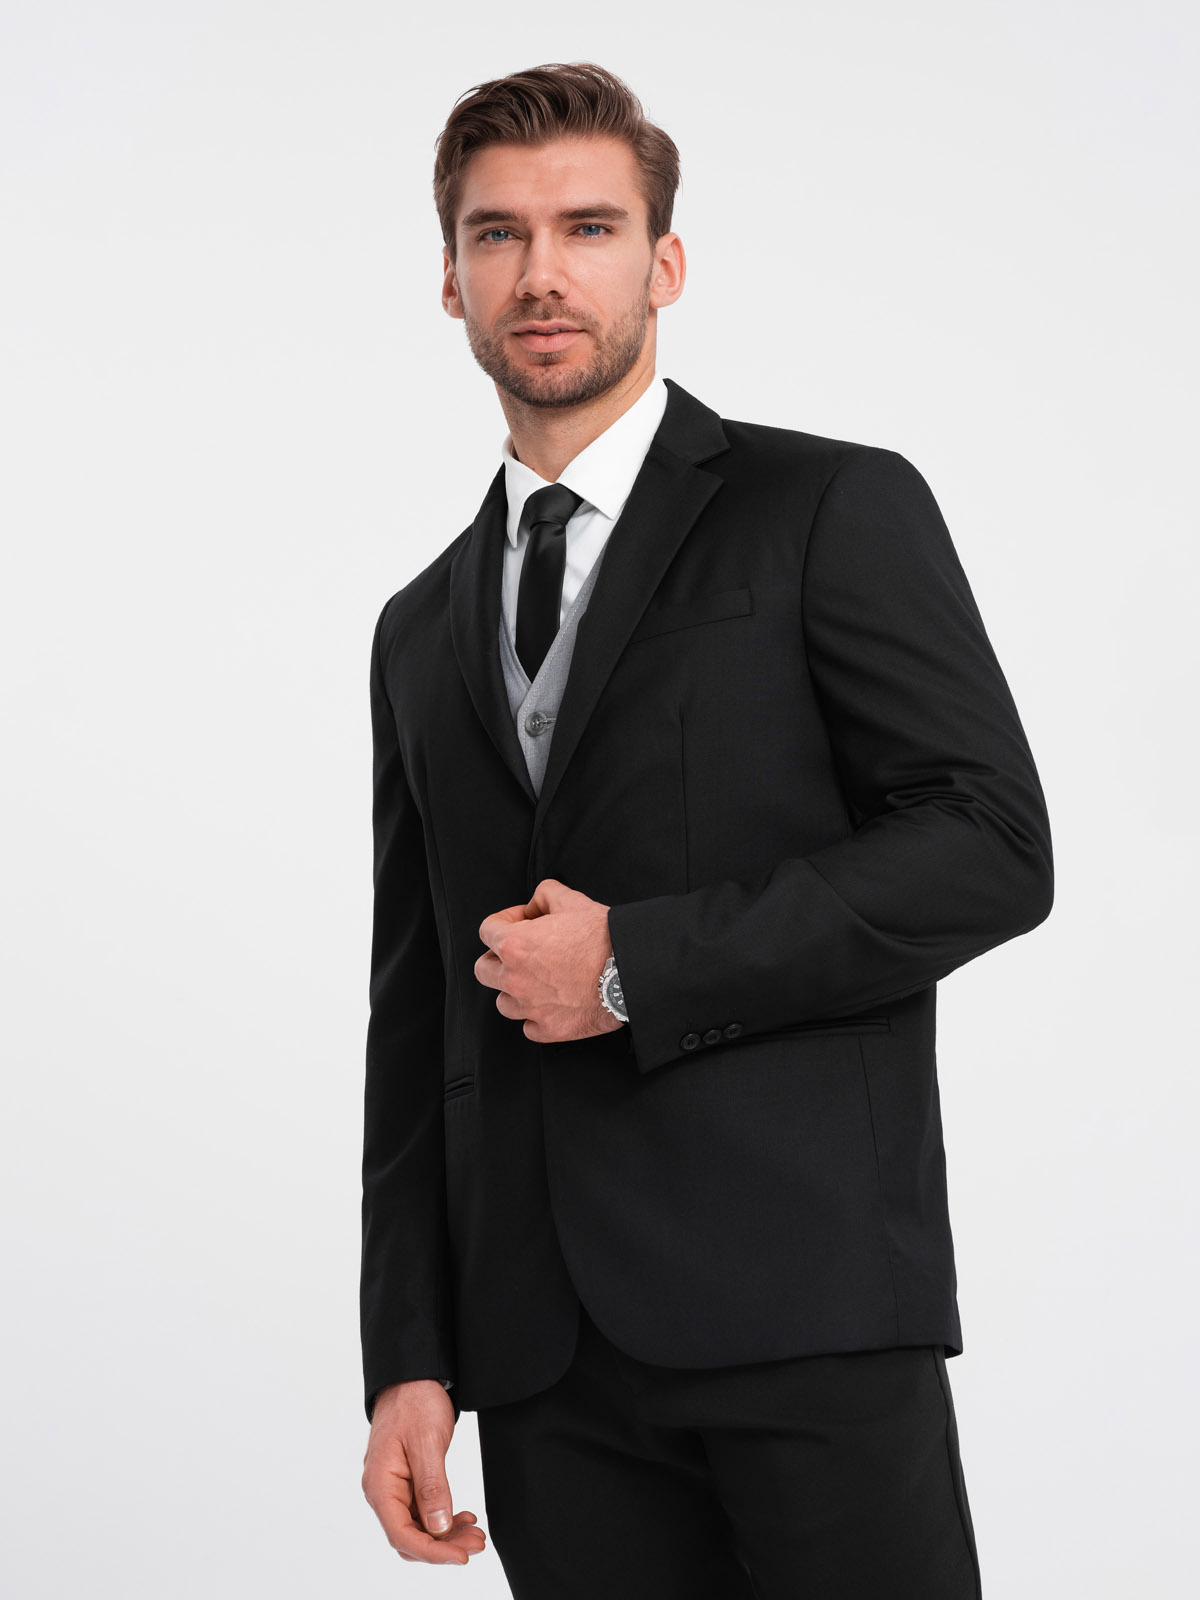 Ombre Men's classic jacket with pillowcase pocket - black